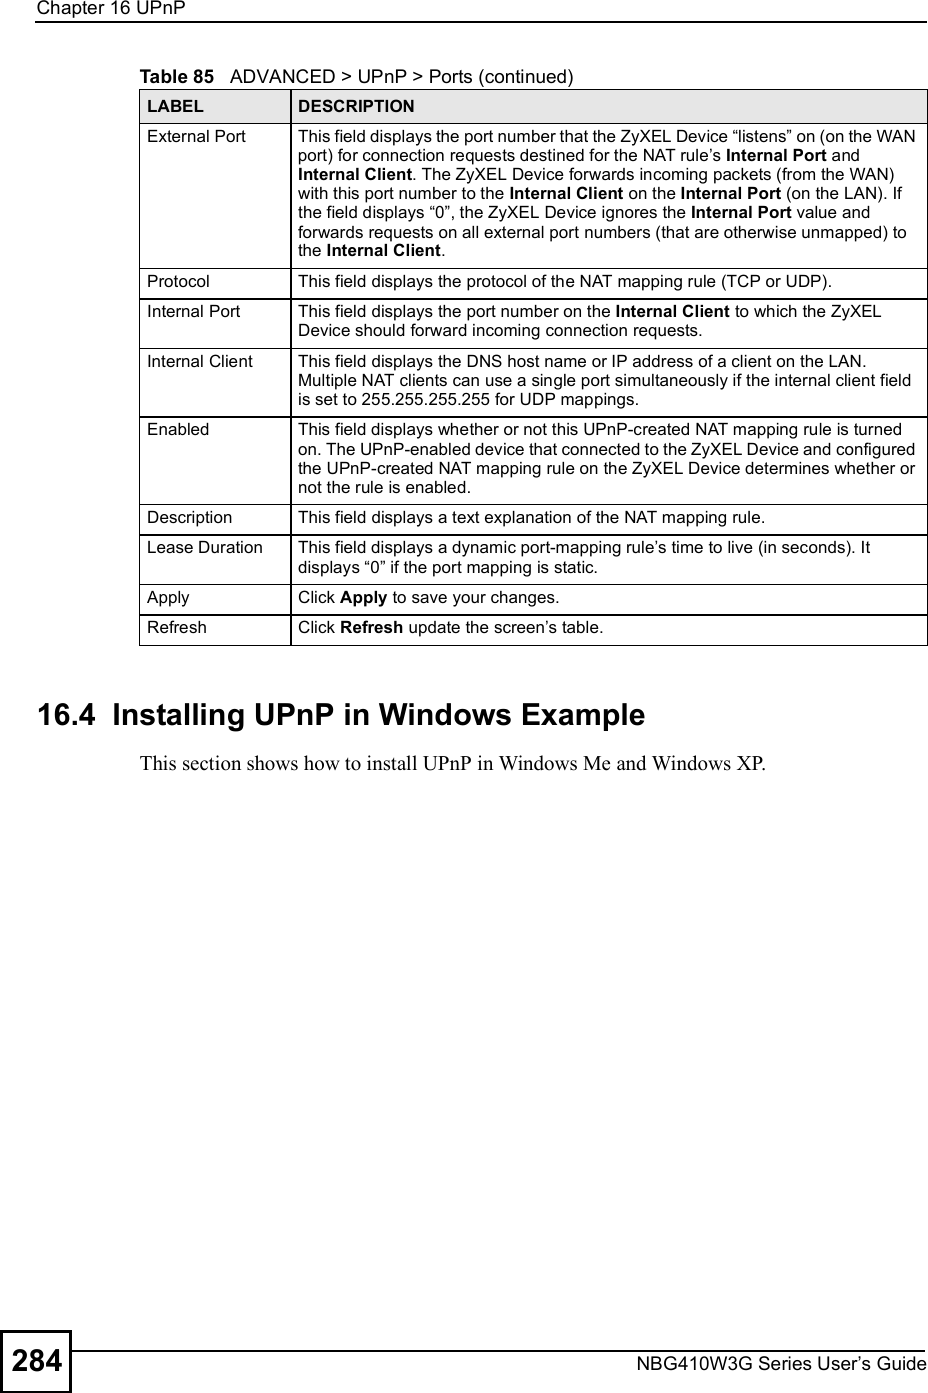 Chapter 16UPnPNBG410W3G Series User s Guide28416.4  Installing UPnP in Windows ExampleThis section shows how to install UPnP in Windows Me and Windows XP.  External Port This field displays the port number that the ZyXEL Device &quot;listens# on (on the WAN port) for connection requests destined for the NAT rule s Internal Port and Internal Client. The ZyXEL Device forwards incoming packets (from the WAN) with this port number to the Internal Client on the Internal Port (on the LAN). If the field displays &quot;0#, the ZyXEL Device ignores the Internal Port value and forwards requests on all external port numbers (that are otherwise unmapped) to the Internal Client.Protocol This field displays the protocol of the NAT mapping rule (TCP or UDP). Internal Port This field displays the port number on the Internal Client to which the ZyXEL Device should forward incoming connection requests.Internal Client This field displays the DNS host name or IP address of a client on the LAN. Multiple NAT clients can use a single port simultaneously if the internal client field is set to 255.255.255.255 for UDP mappings.Enabled This field displays whether or not this UPnP-created NAT mapping rule is turned on. The UPnP-enabled device that connected to the ZyXEL Device and configured the UPnP-created NAT mapping rule on the ZyXEL Device determines whether or not the rule is enabled.Description This field displays a text explanation of the NAT mapping rule. Lease Duration This field displays a dynamic port-mapping rule s time to live (in seconds). It displays &quot;0# if the port mapping is static.Apply Click Apply to save your changes.Refresh Click Refresh update the screen s table.Table 85   ADVANCED &gt; UPnP &gt; Ports (continued)LABEL DESCRIPTION